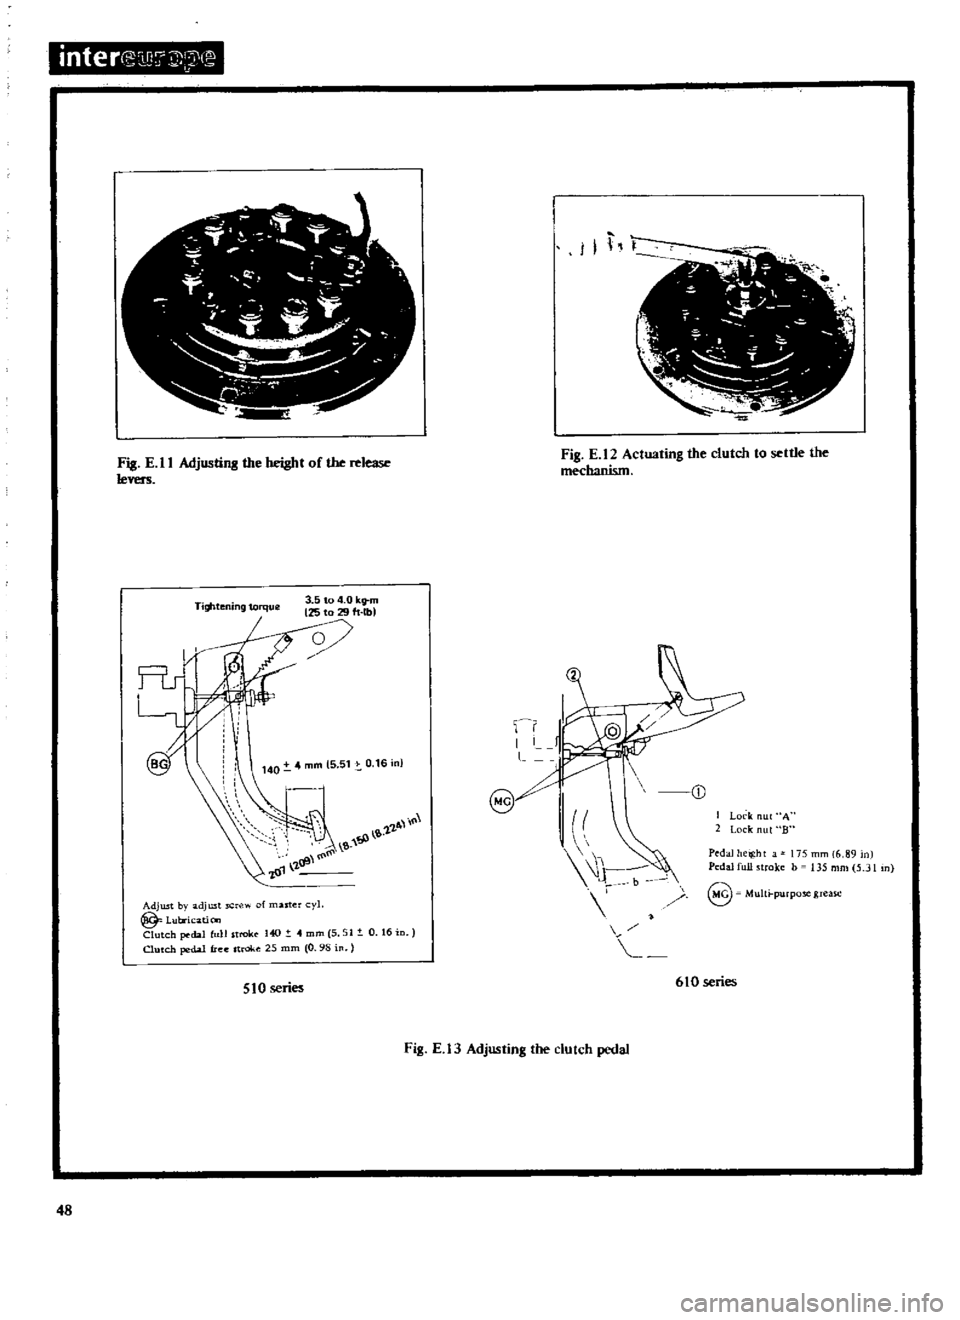 DATSUN 510 1969  Service Service Manual 
inter 
1D7
J

3

T 
T

aj

W

n 
J

I

1

T

f 
T 
7

e

Fig 
E 
II

Adjustillll 
the

height 
of 
the 
release

levers 
Fig 
E 
12 
Actuating 
the 
clutch 
to 
settle 
the

mechanism

Tightening 
to